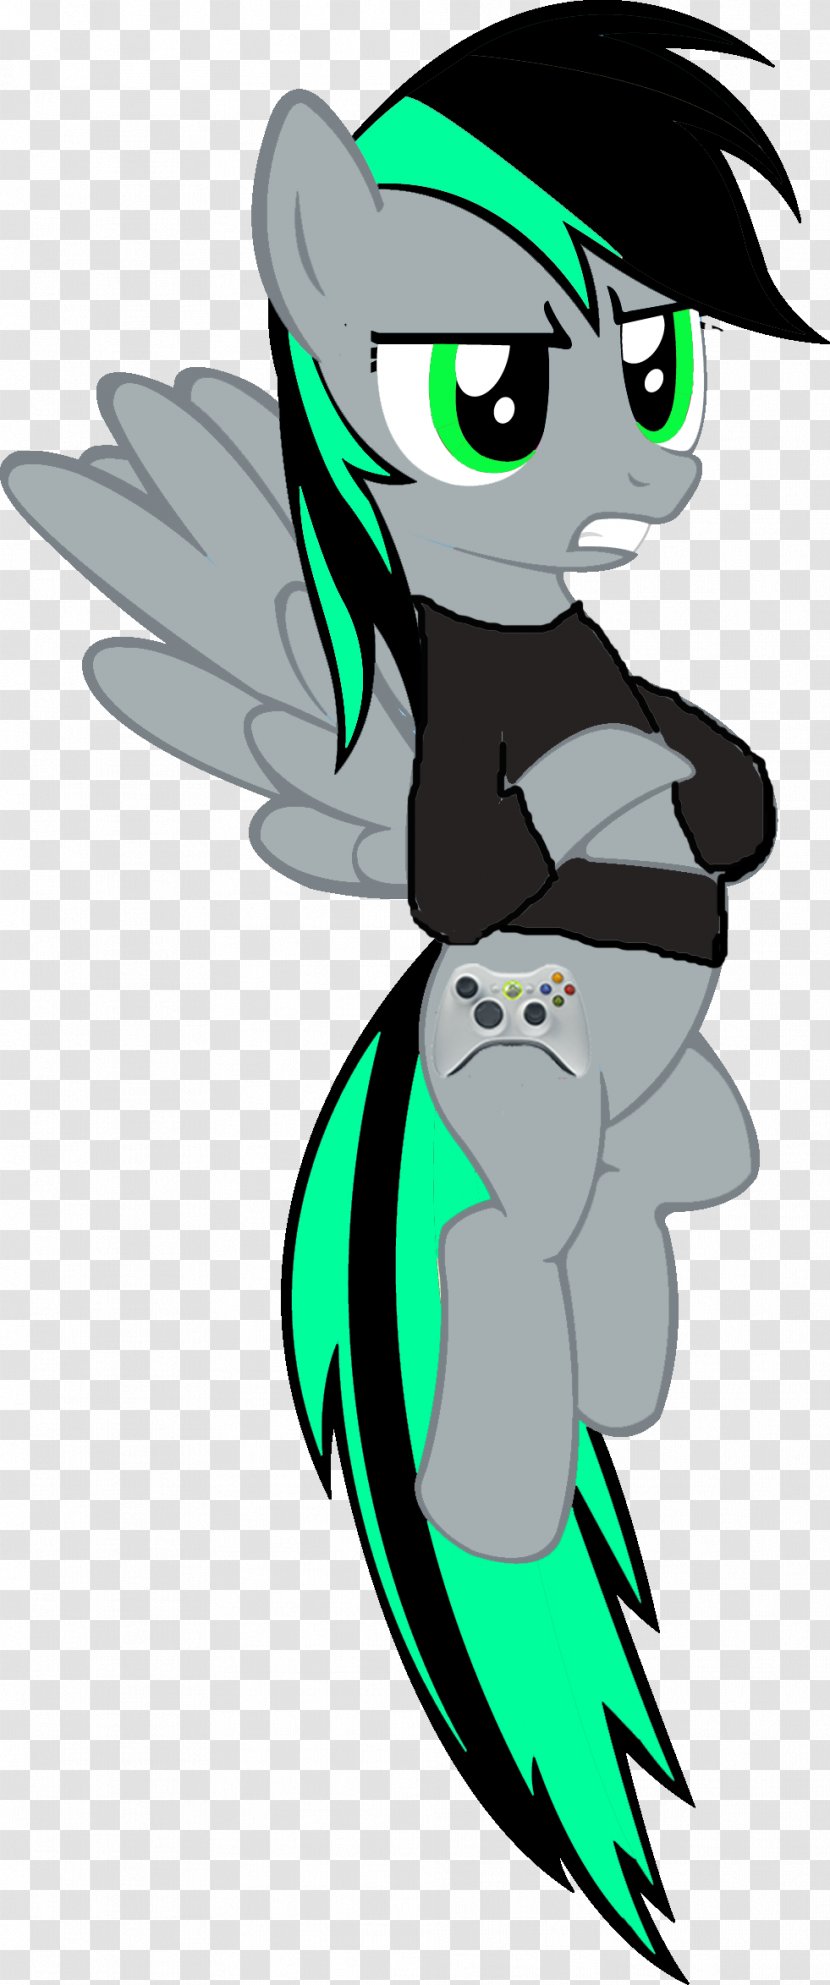 Xbox 360 Controller Fairy Horse - Leaf - Arms Crossed Transparent PNG